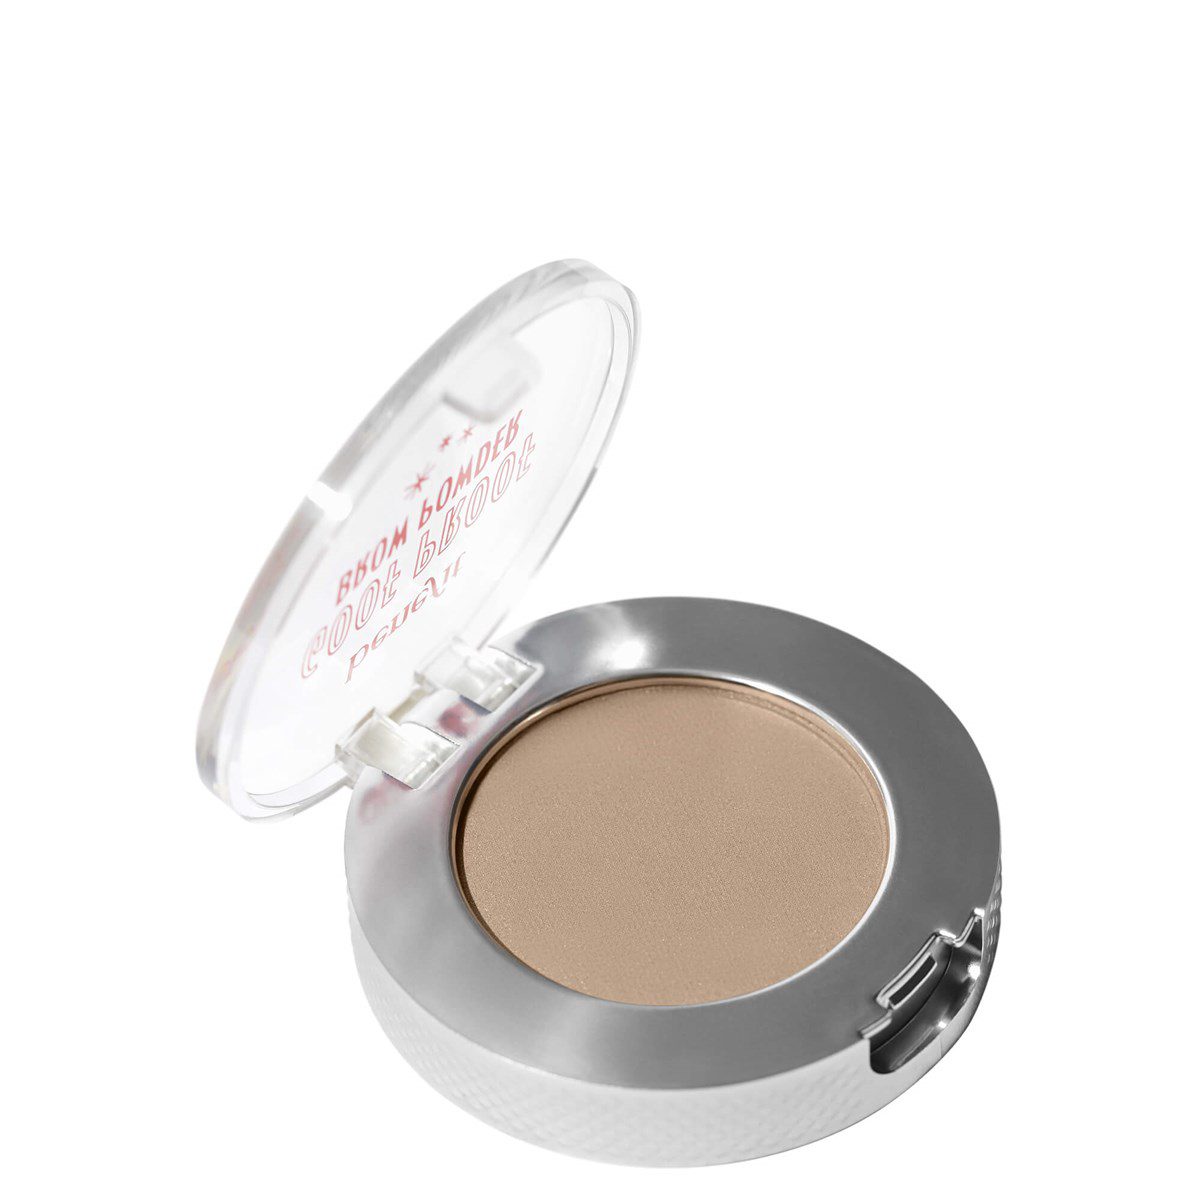 et_goofproofbrowpowder_product_open_shade1 (1)